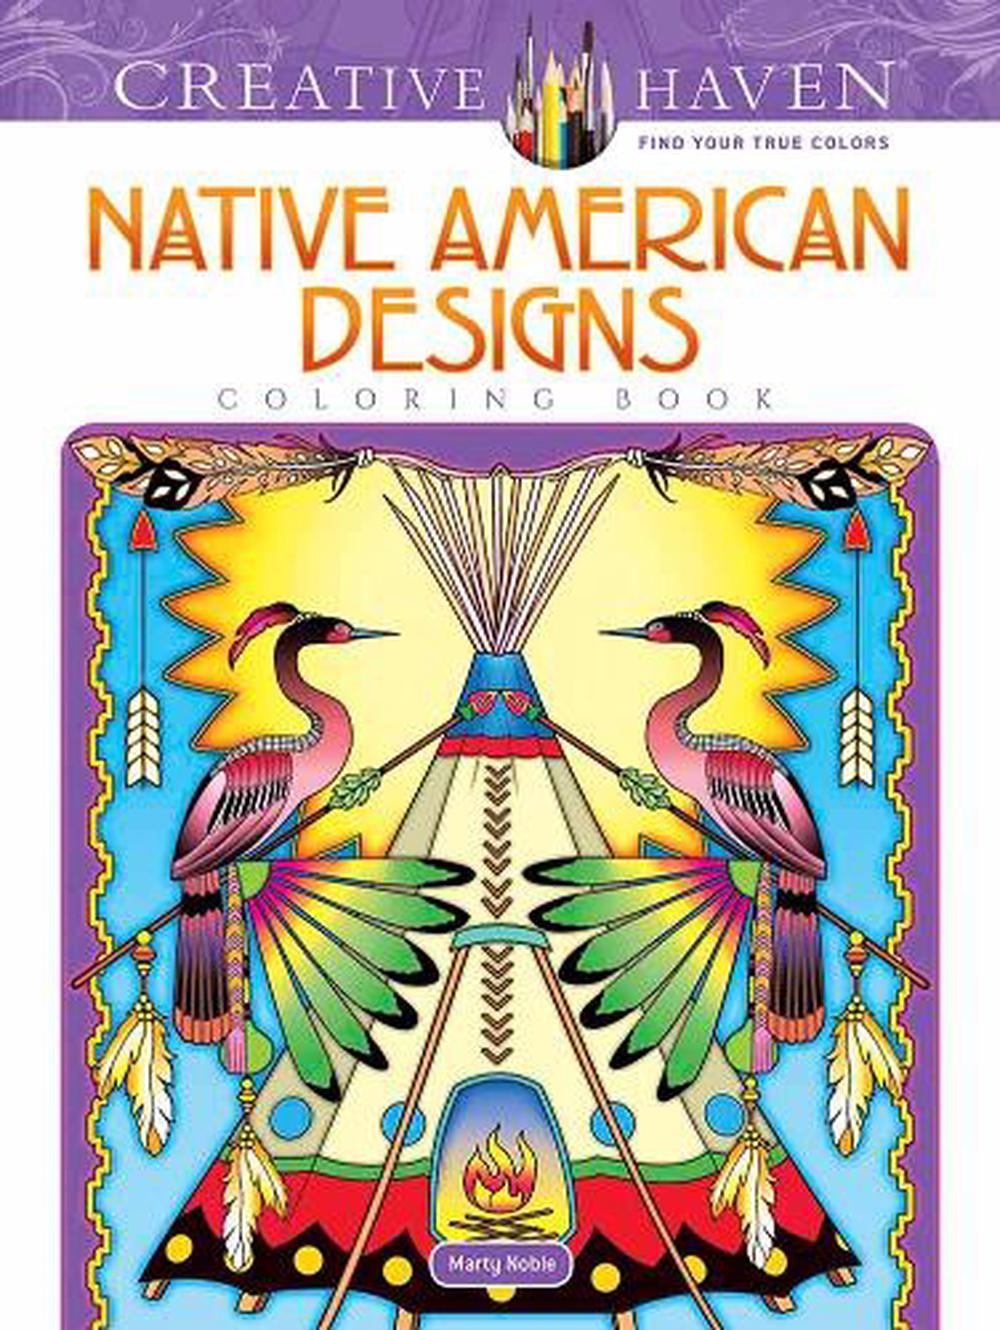 African Designs Coloring Book by Marty Noble